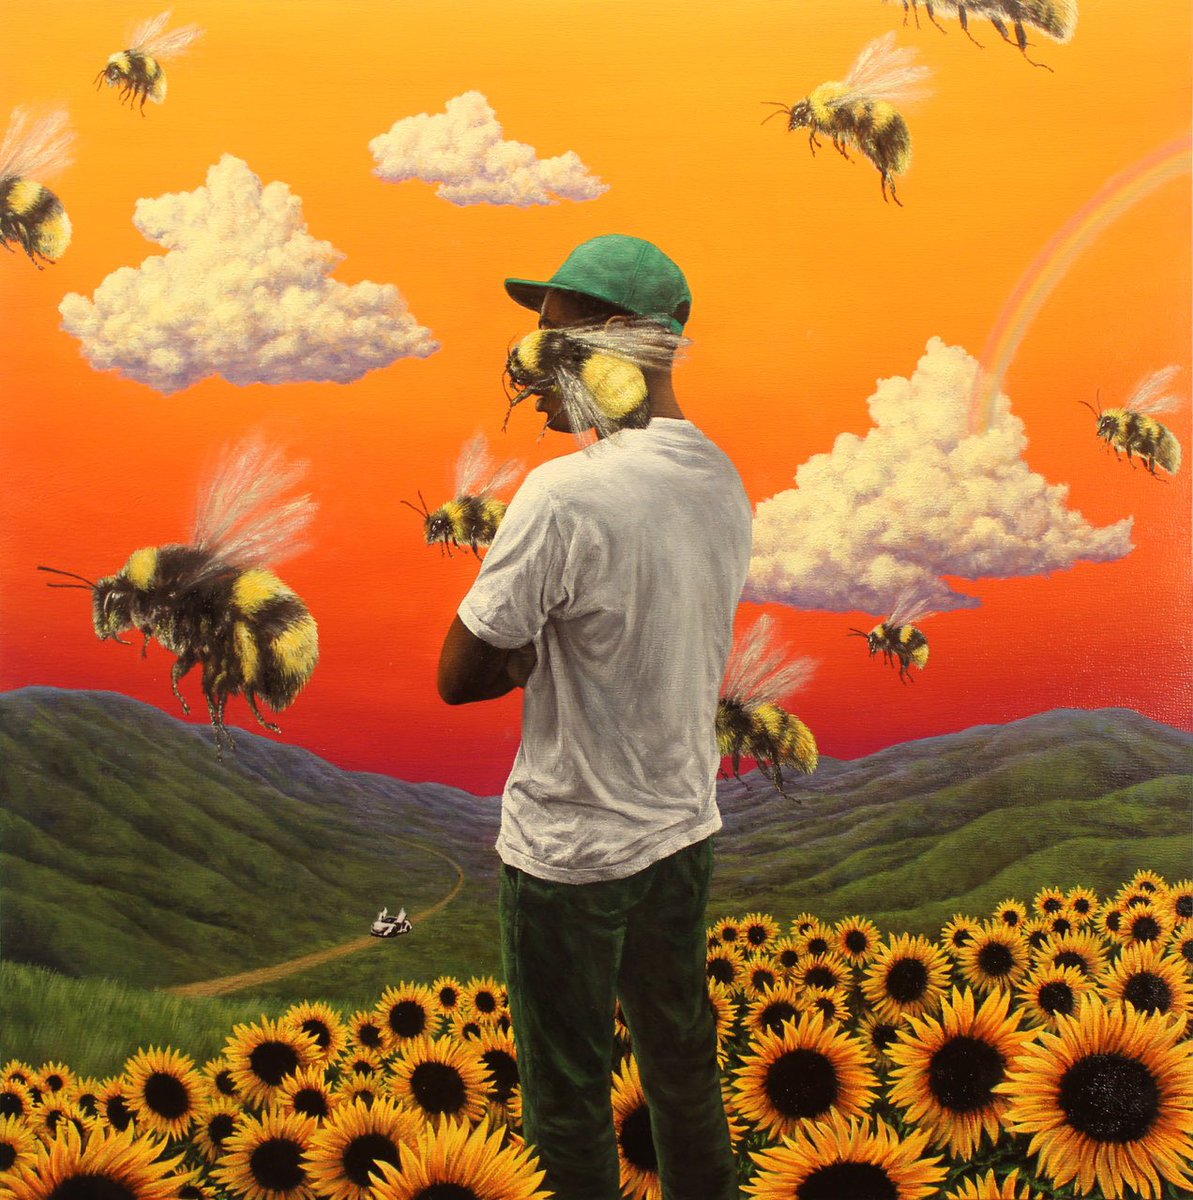 “Flower Boy” LP Shows Us A New Side Of Tyler, The Creator